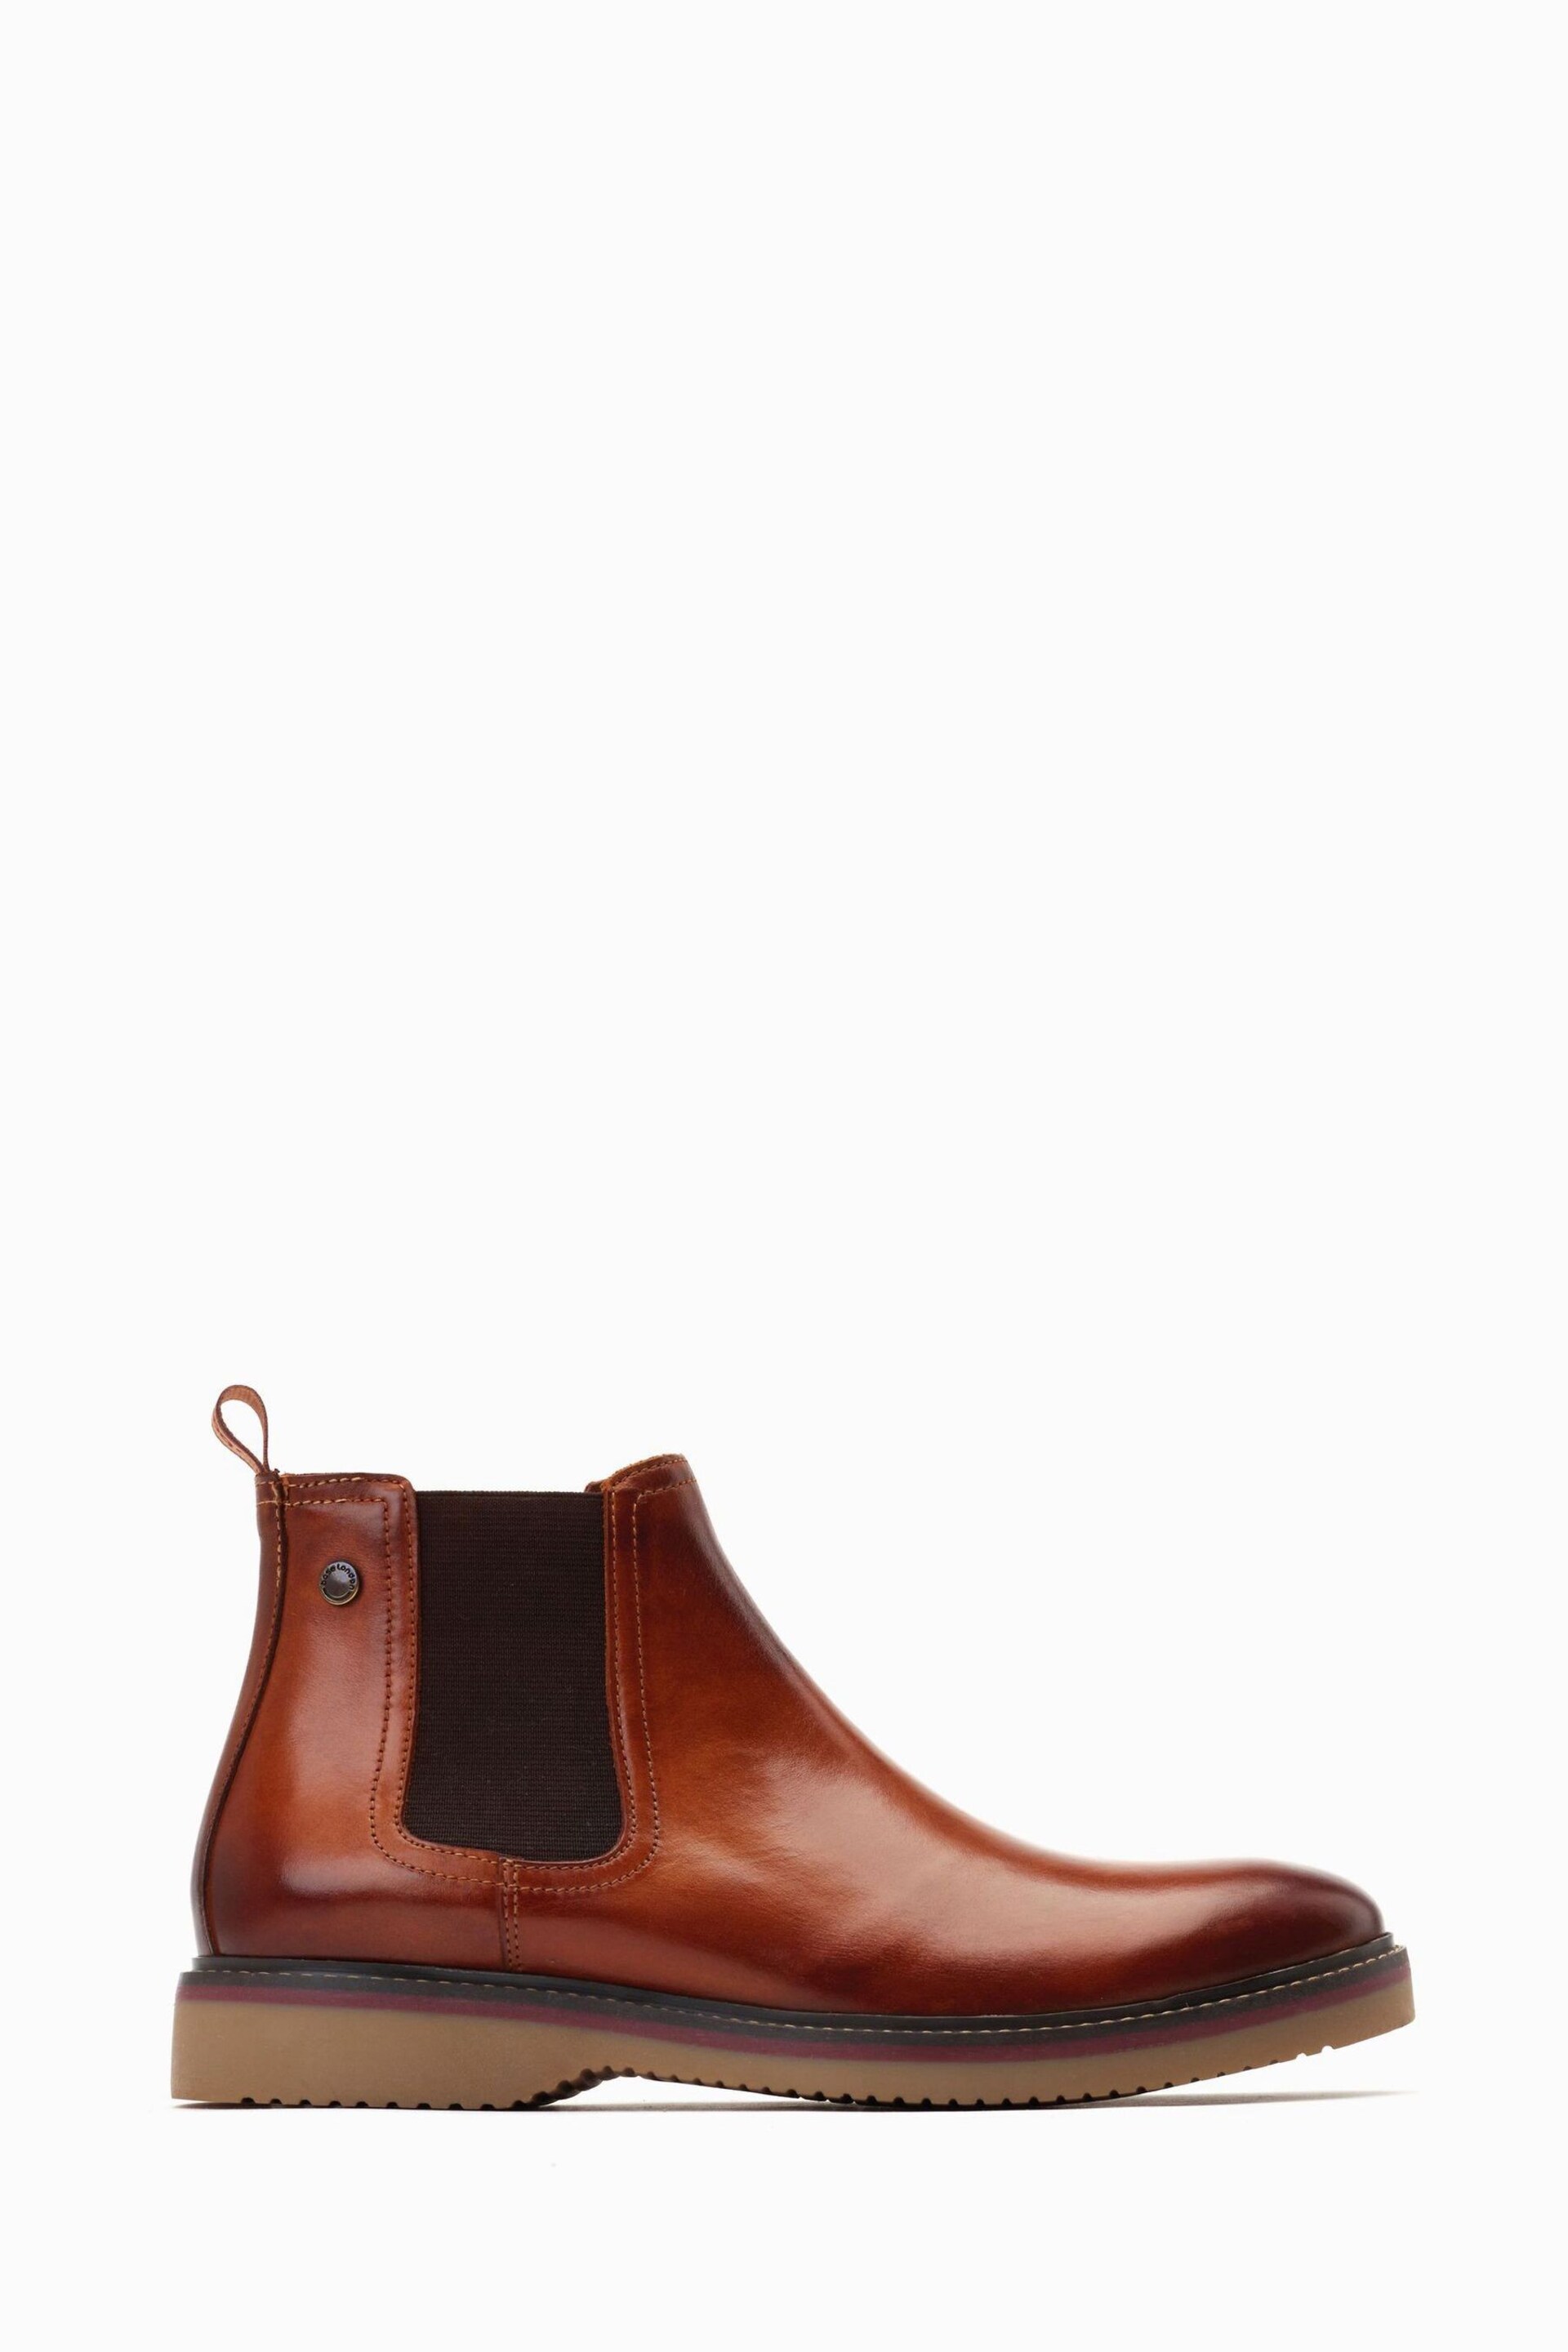 Base London Natural Hooper Pull On Chelsea Boots - Image 1 of 6